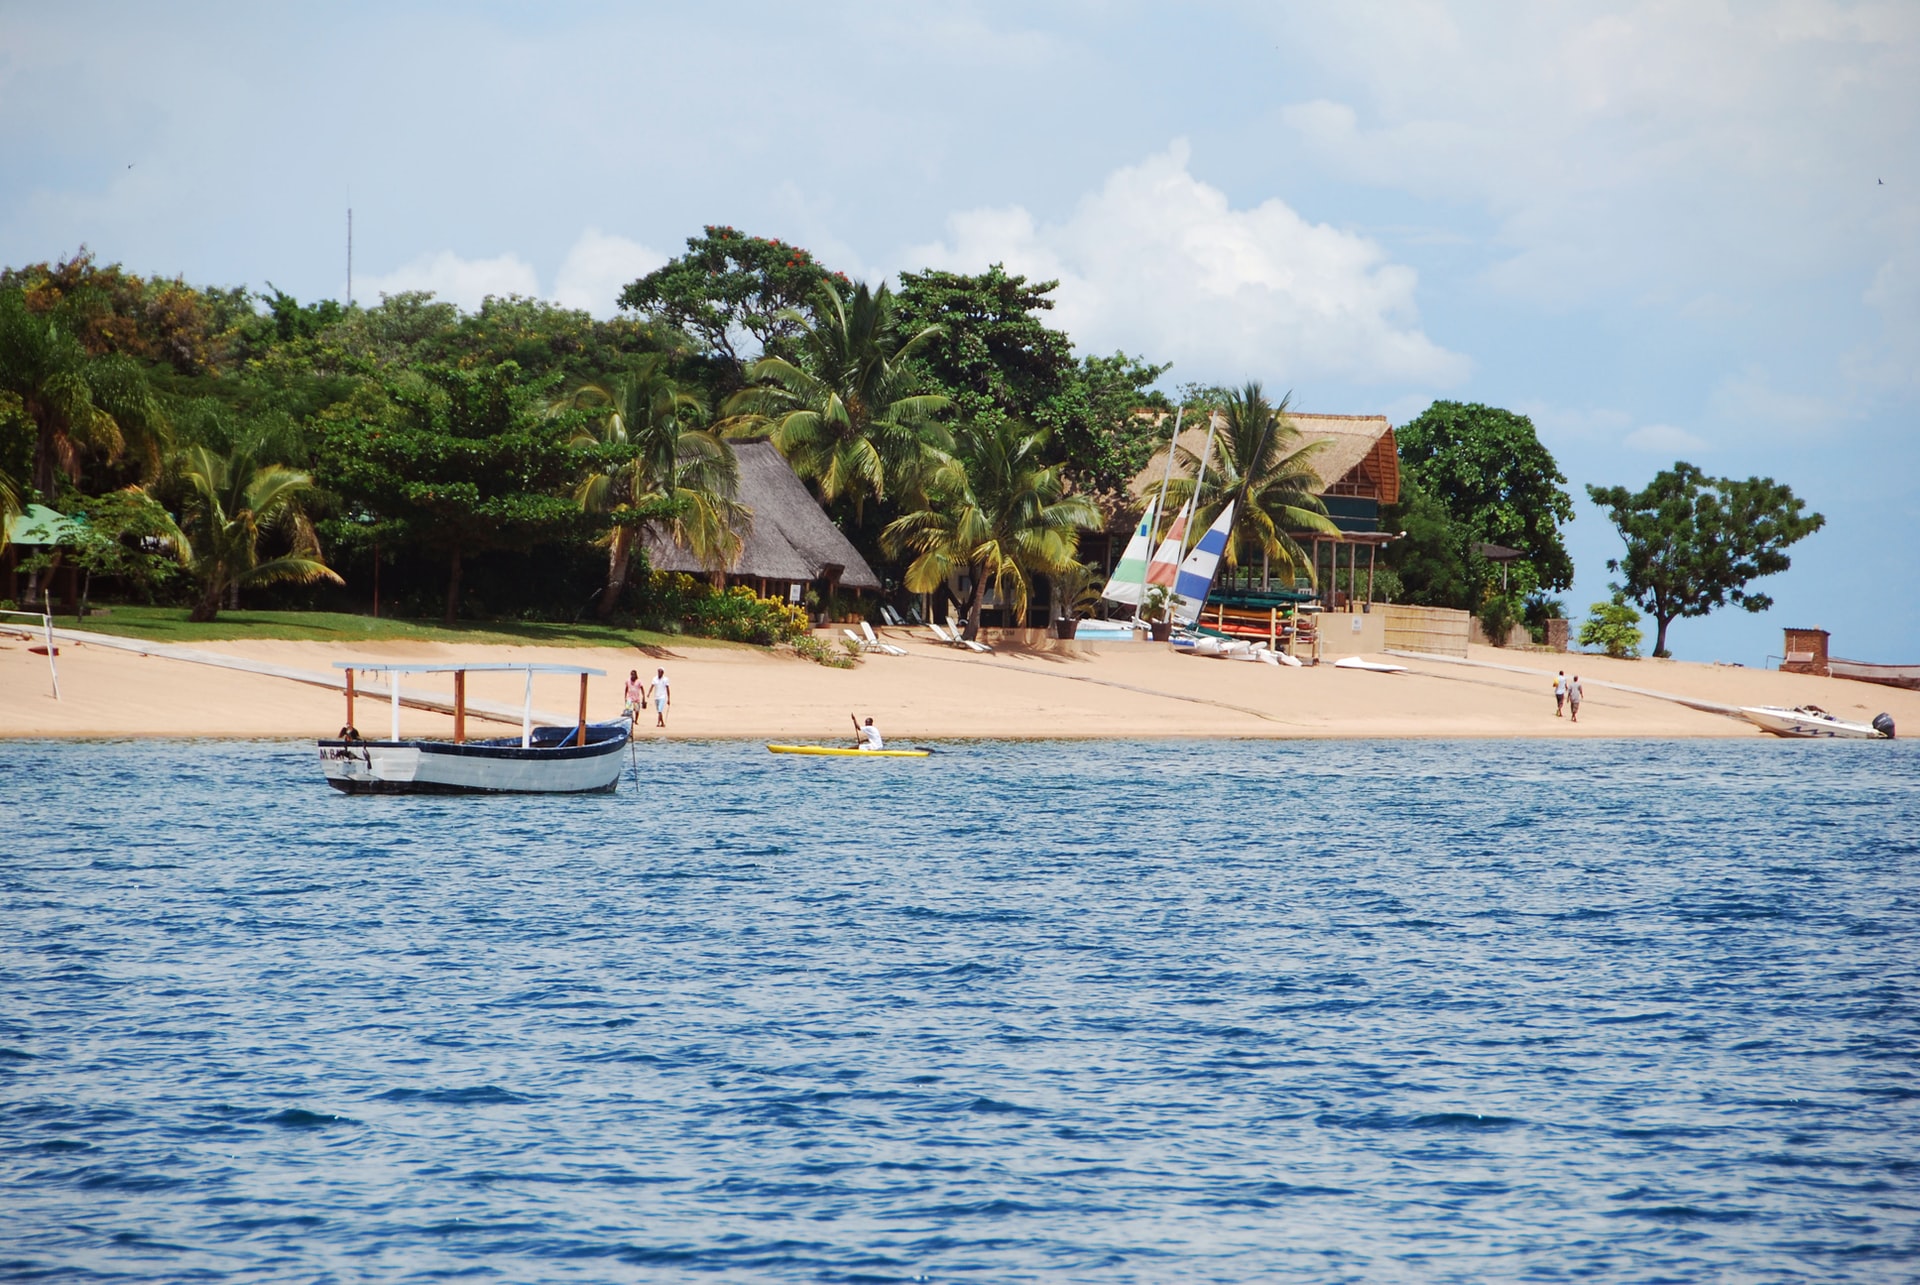 A CASE STUDY OF HOSPITALITY AND TOURISM CHALLENGES AND OPPORTUNITIES IN MALAWI -thetravel.vision